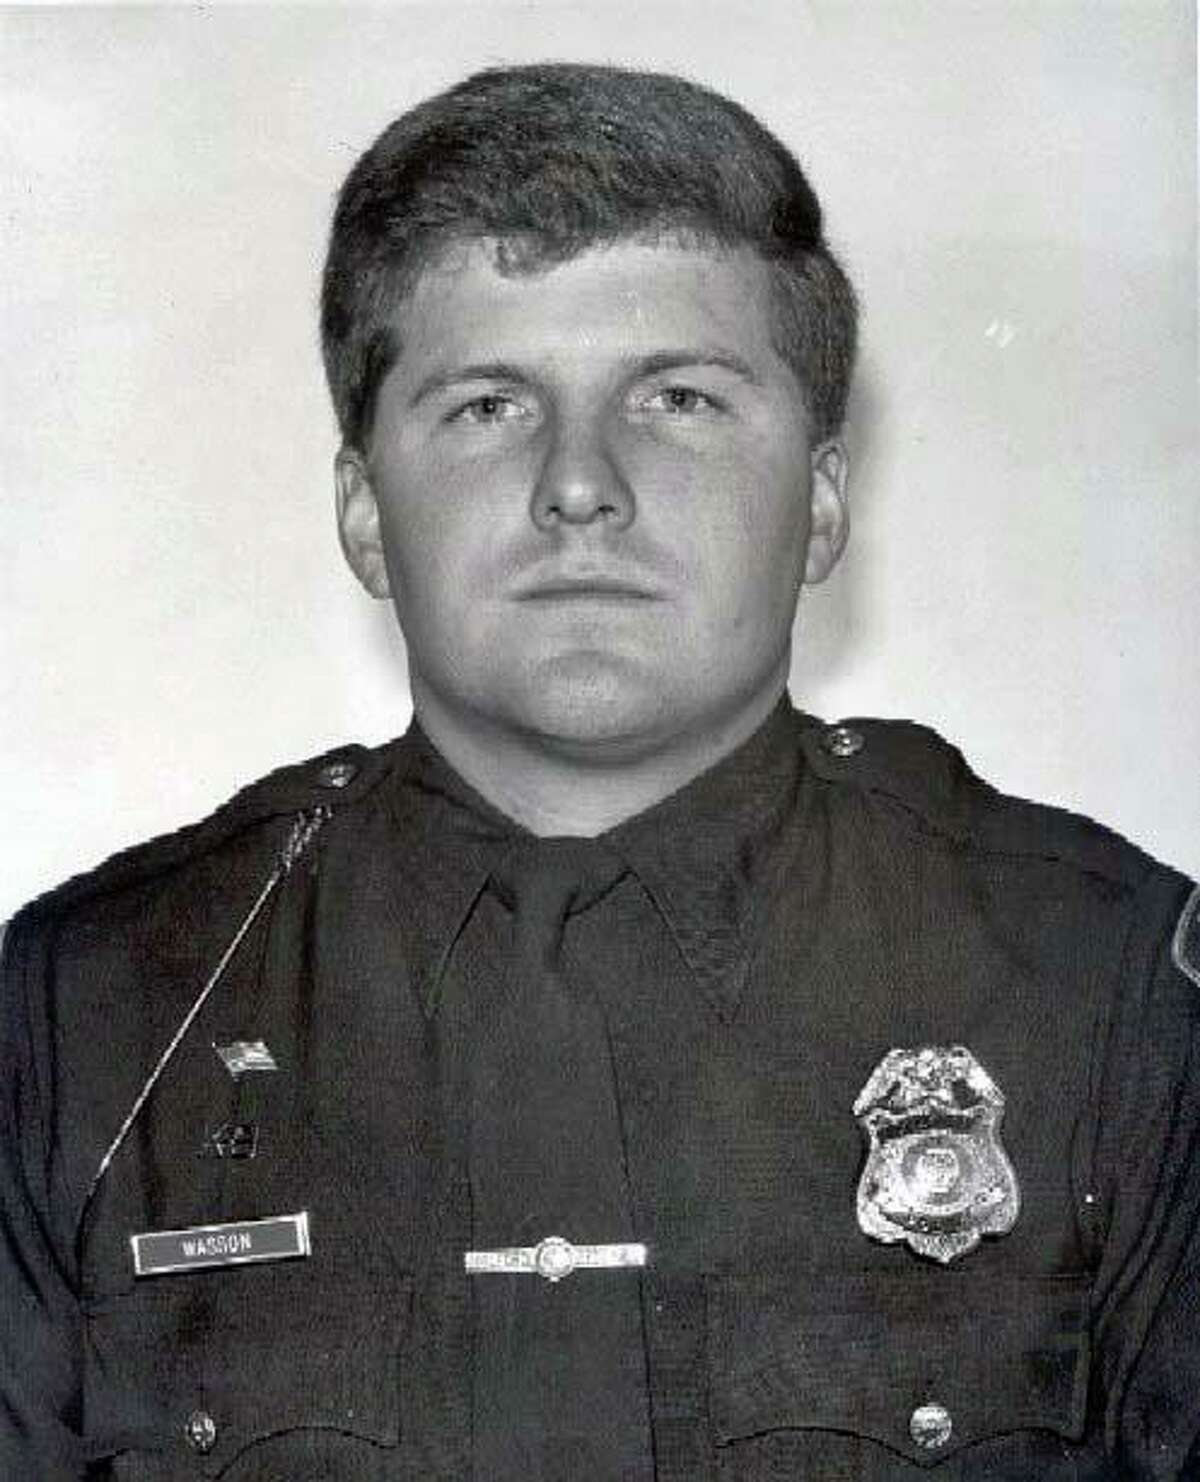 Milford Police Officer Daniel Wasson, 25, was fatally shot during a motor vehicle stop on Boston Post Road in Milford, Conn., on Sunday, April 12, 1987.